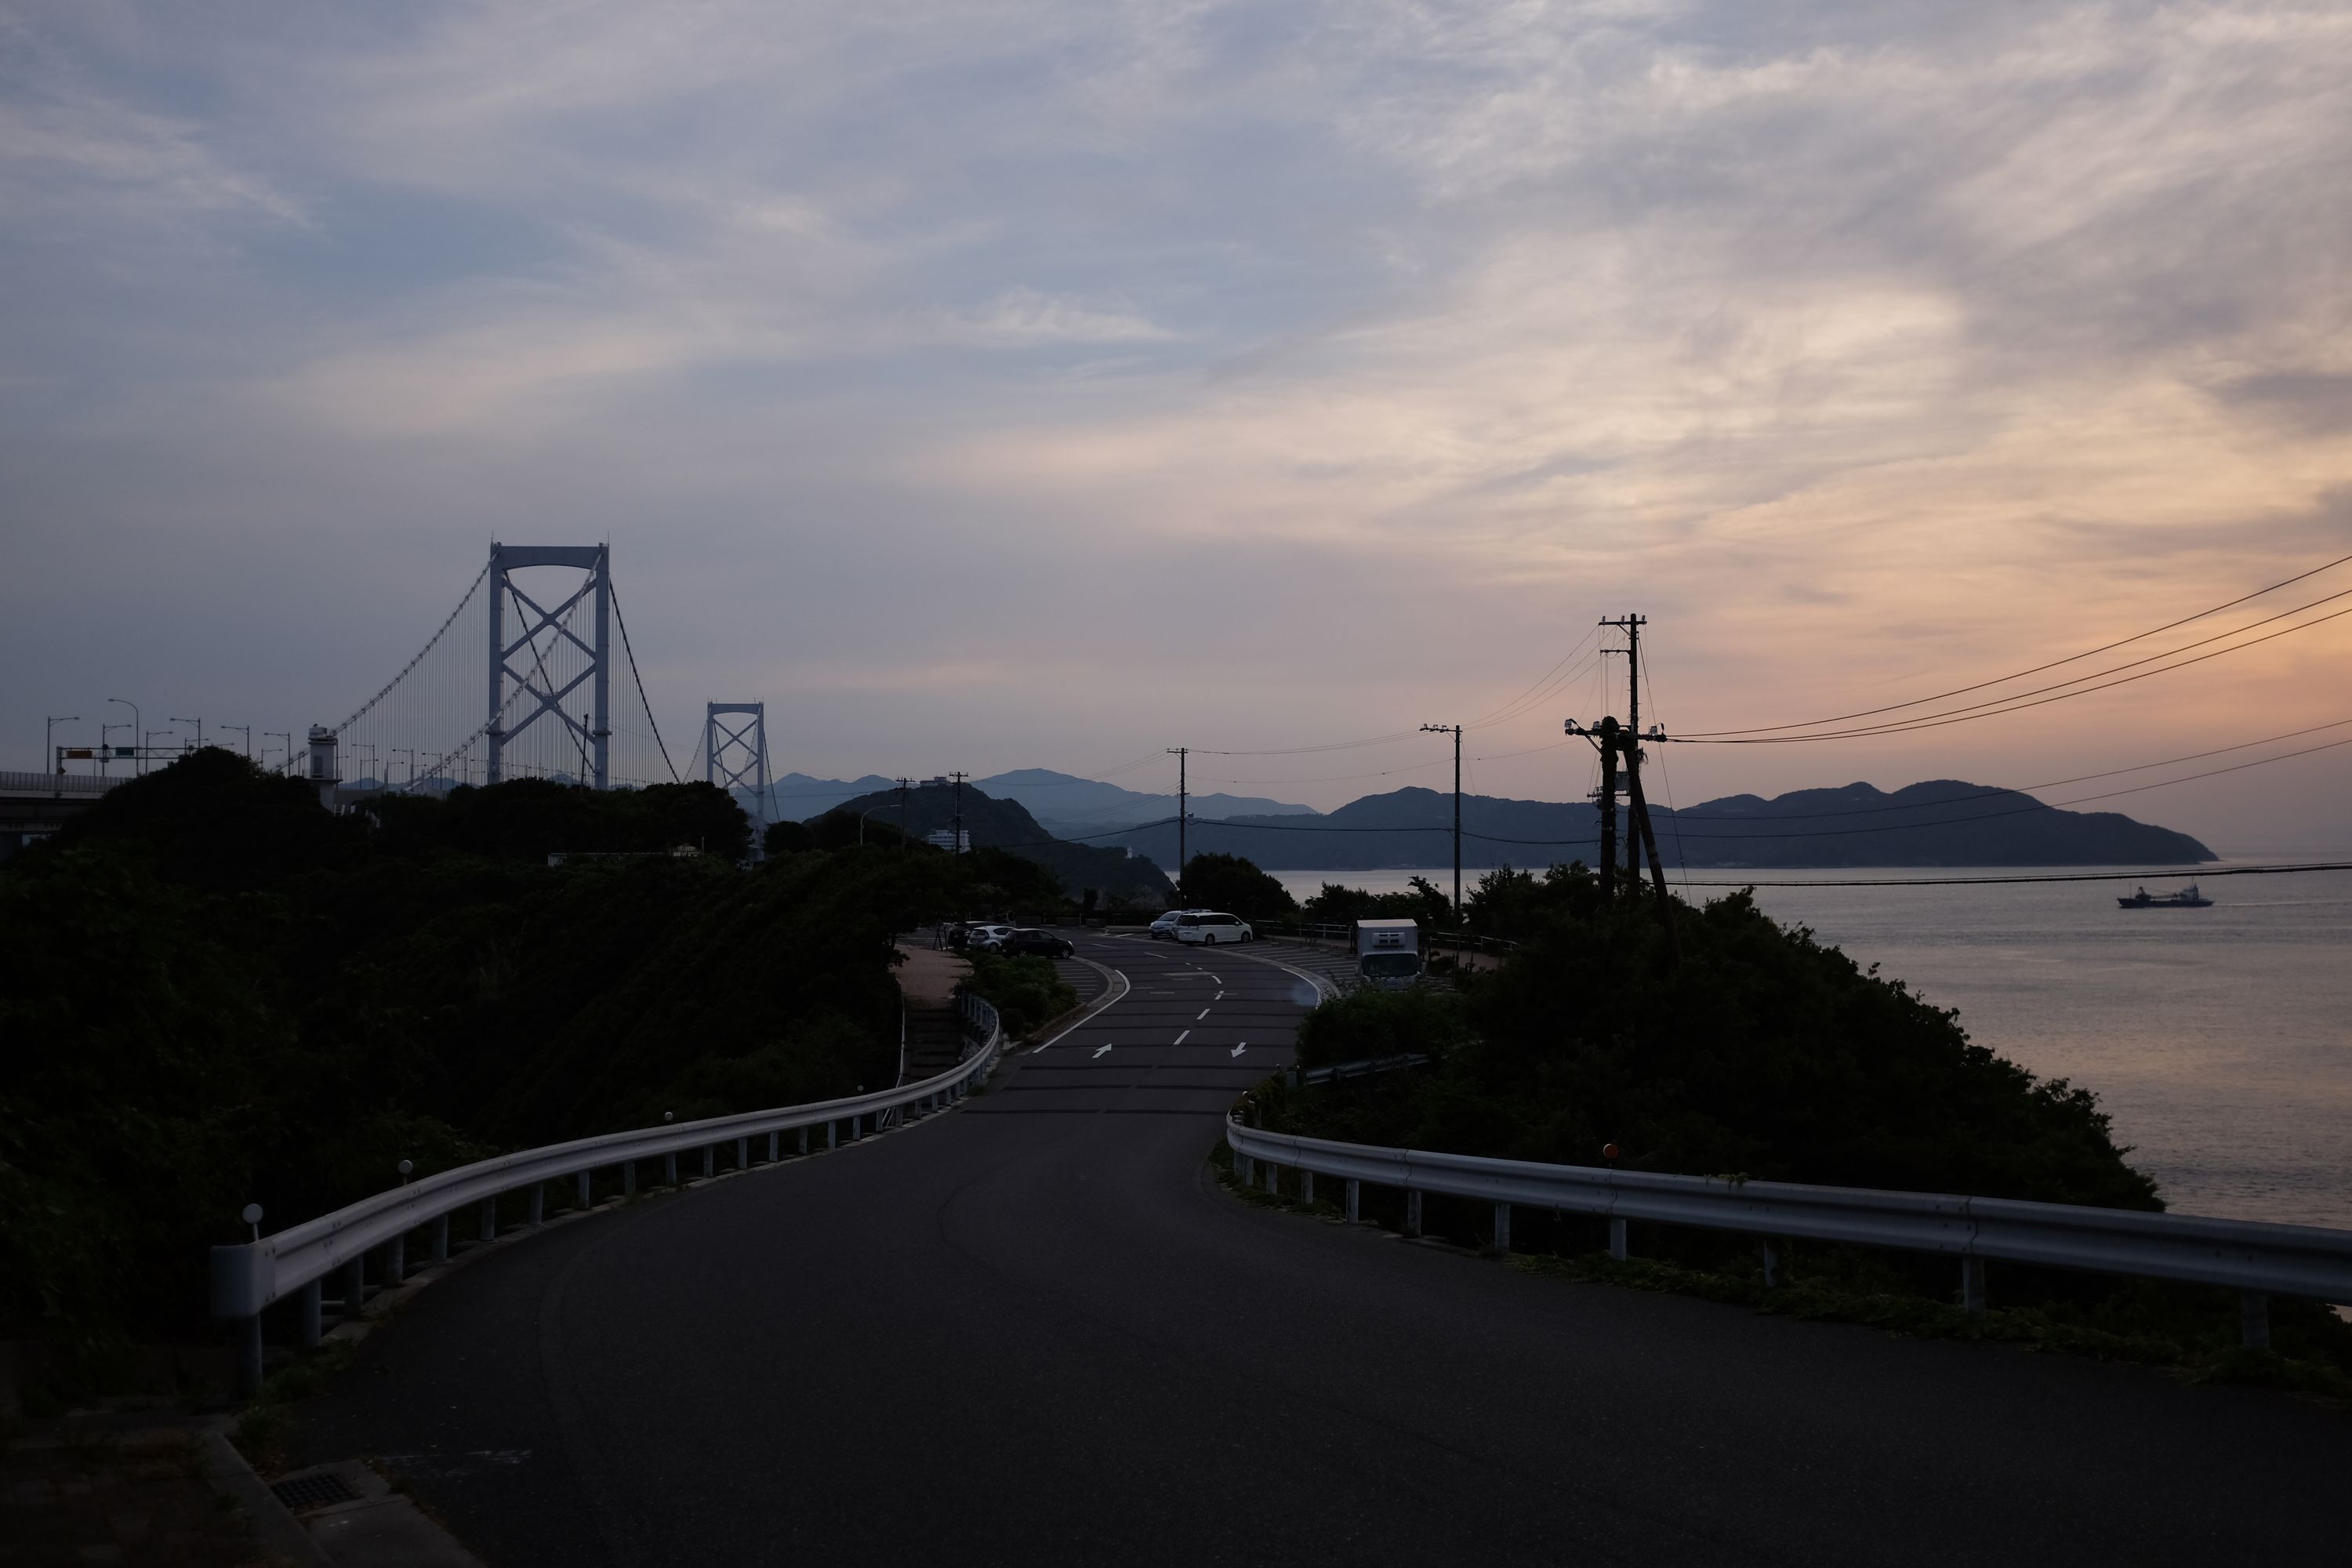 Looking back on the bridge from Awaji Island in the evening light.